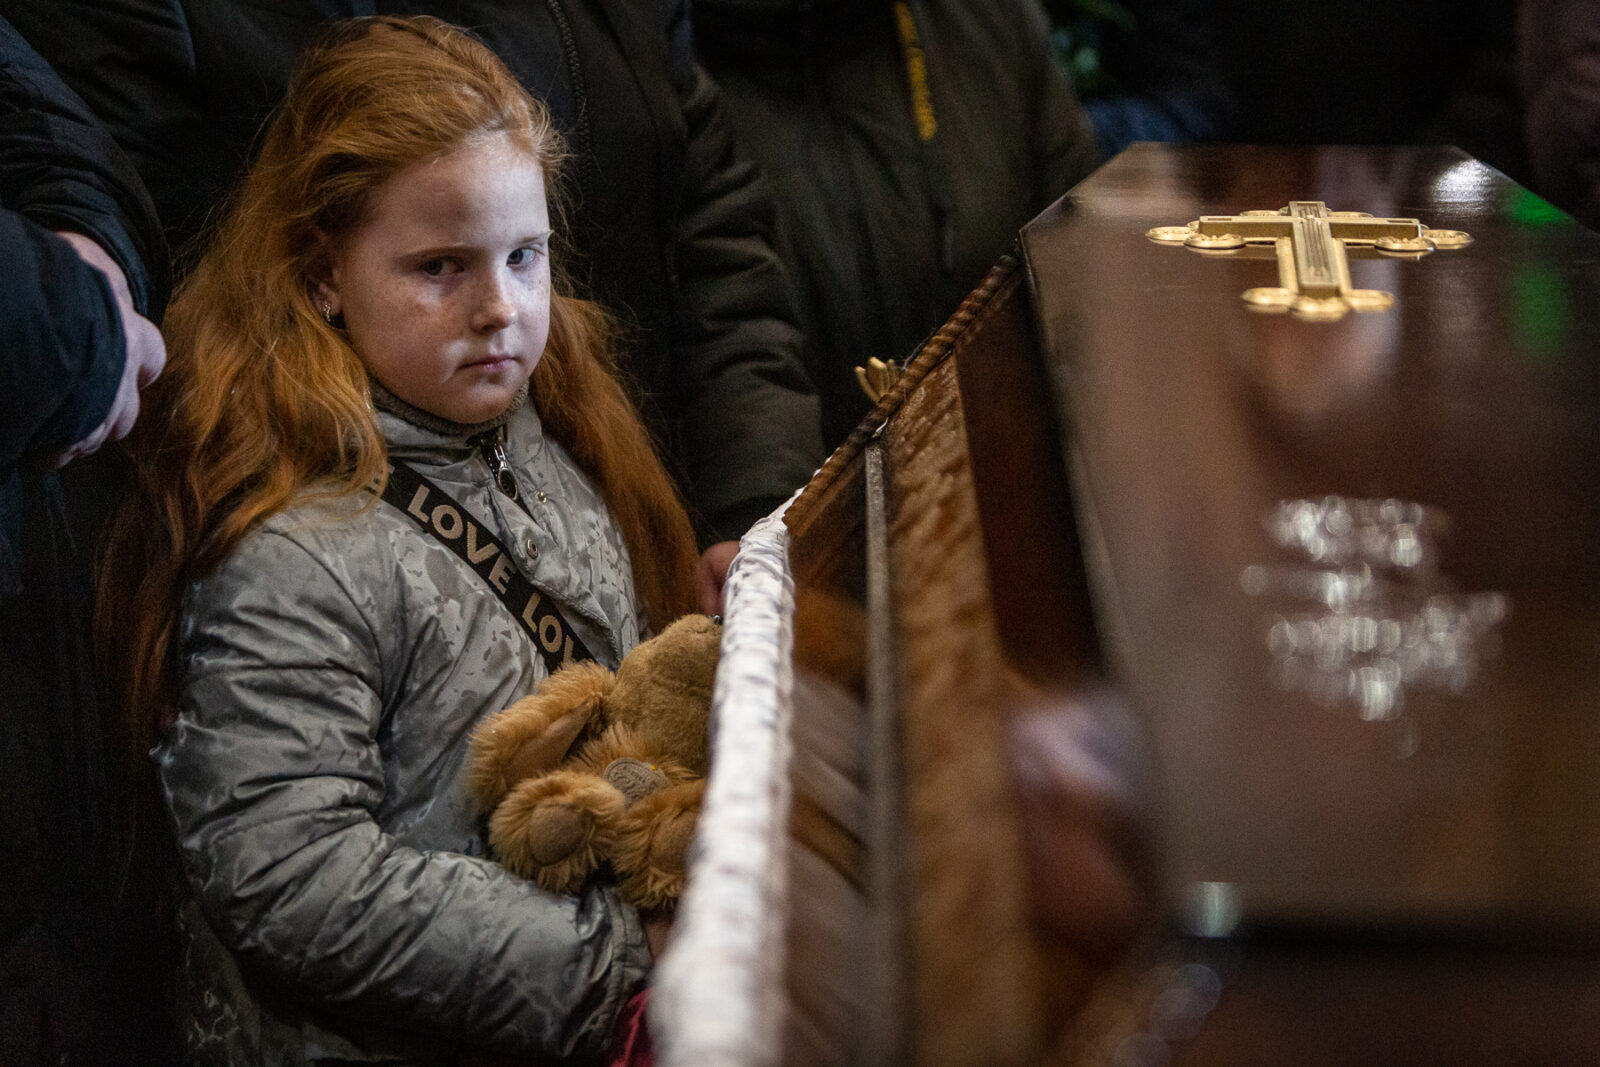 A funeral was held for three of those killed at the International Peacekeeping and Security Center in Yavoriv outside of Lviv near the border with Poland Sunday morning. It was held at the Church of the Most Holy Apostles Peter and Paul in Lviv, Ukraine.